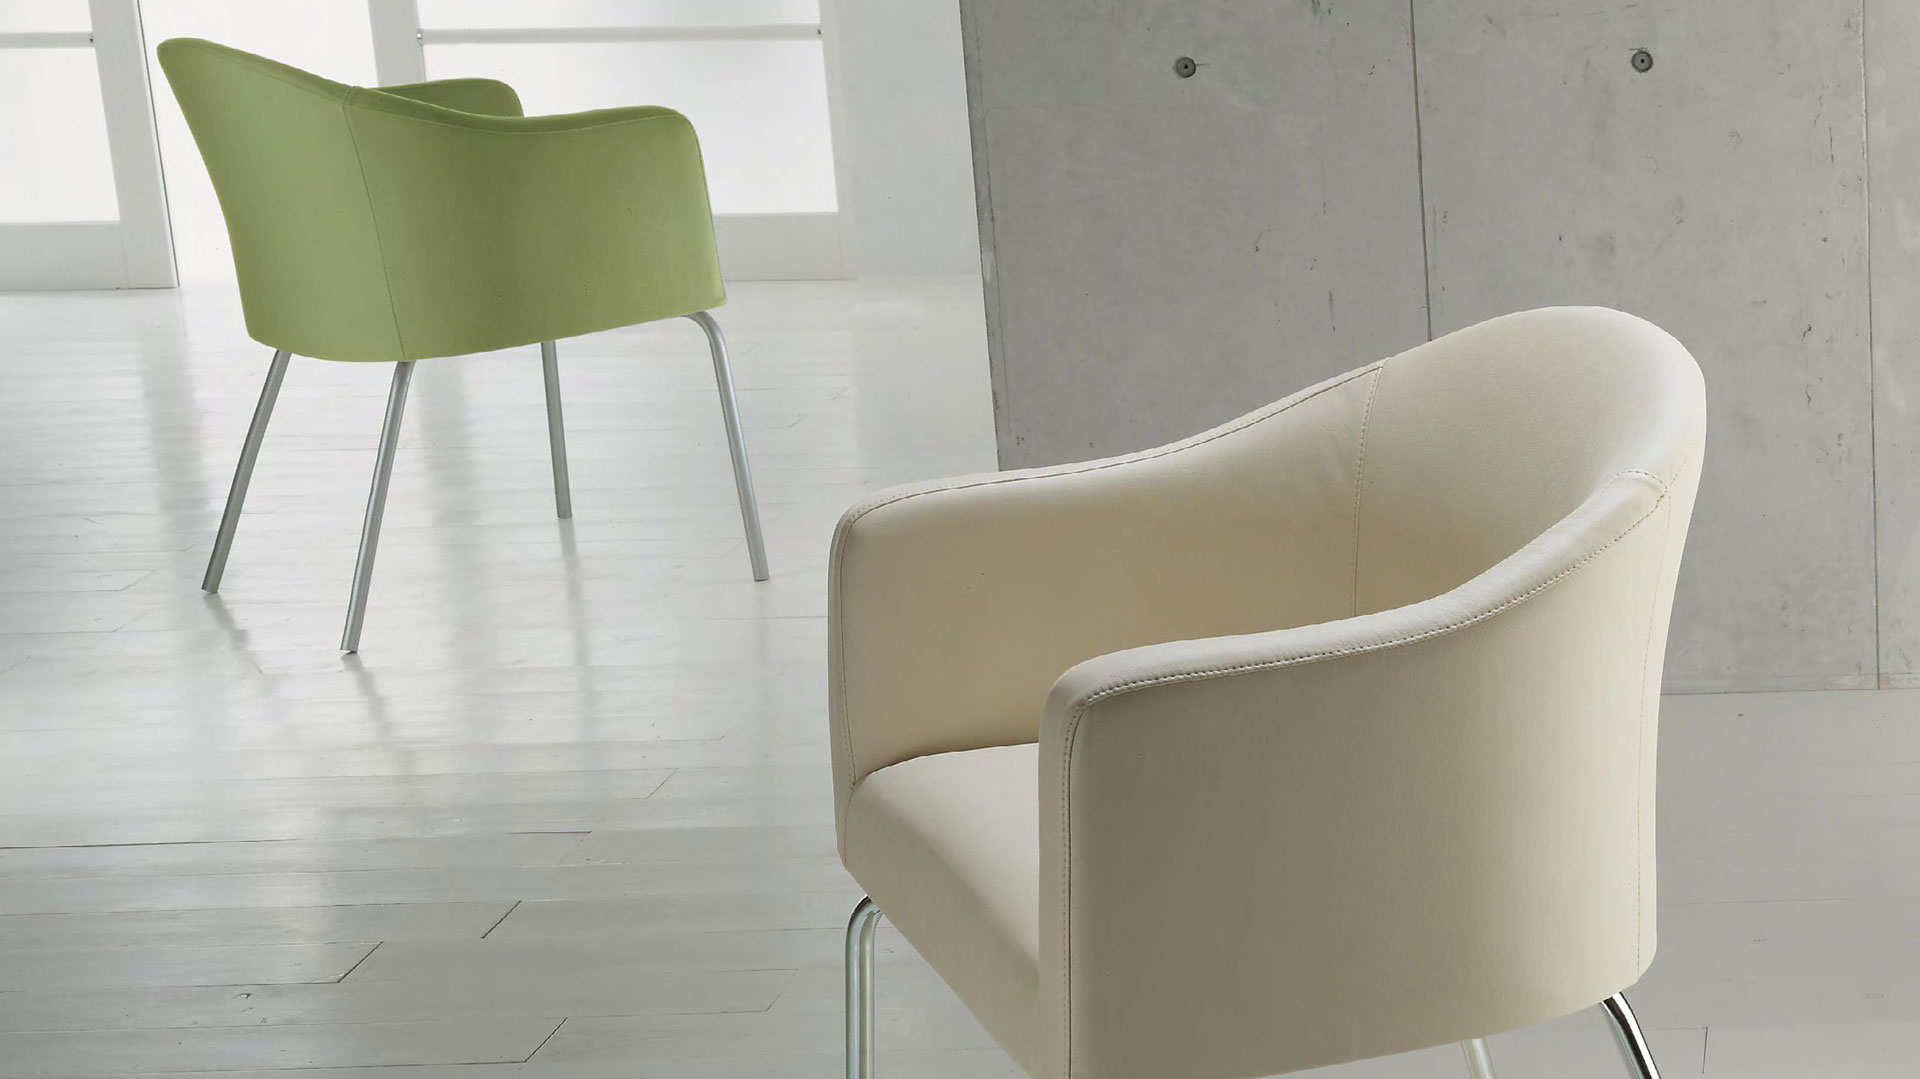 Luna armchairs are available in a range of fabrics including genuine leather